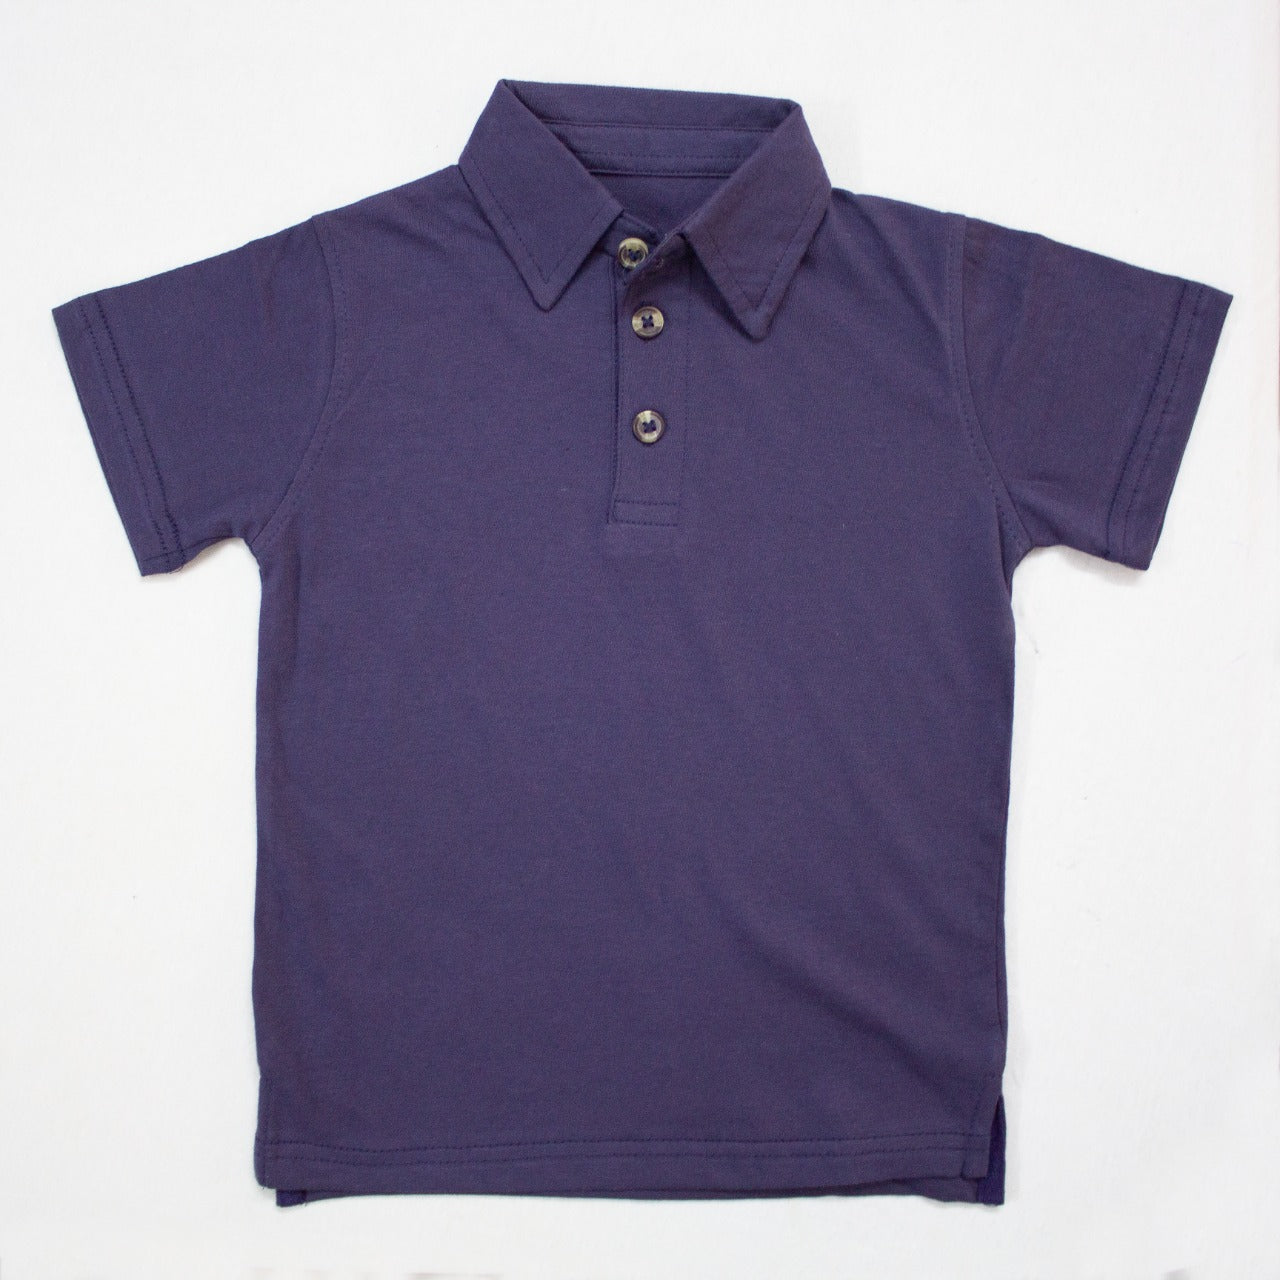 Kids Polo Shirts | Blue Polo Shirt For Kids By: Donny Feathers